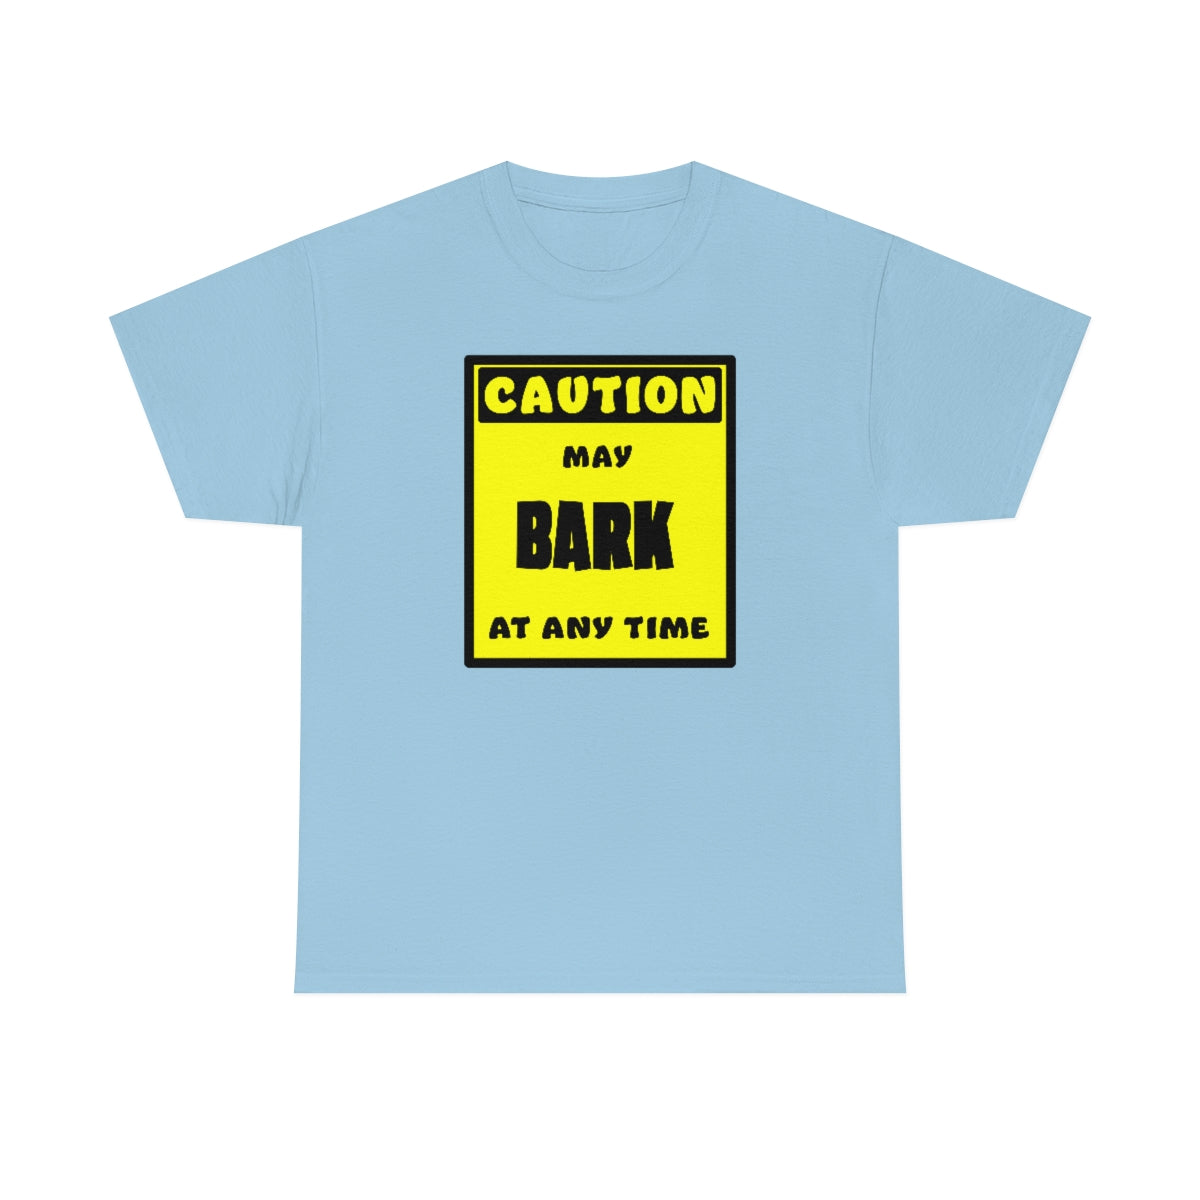 CAUTION! May BARK at any time! - T-Shirt T-Shirt AFLT-Whootorca Light Blue S 